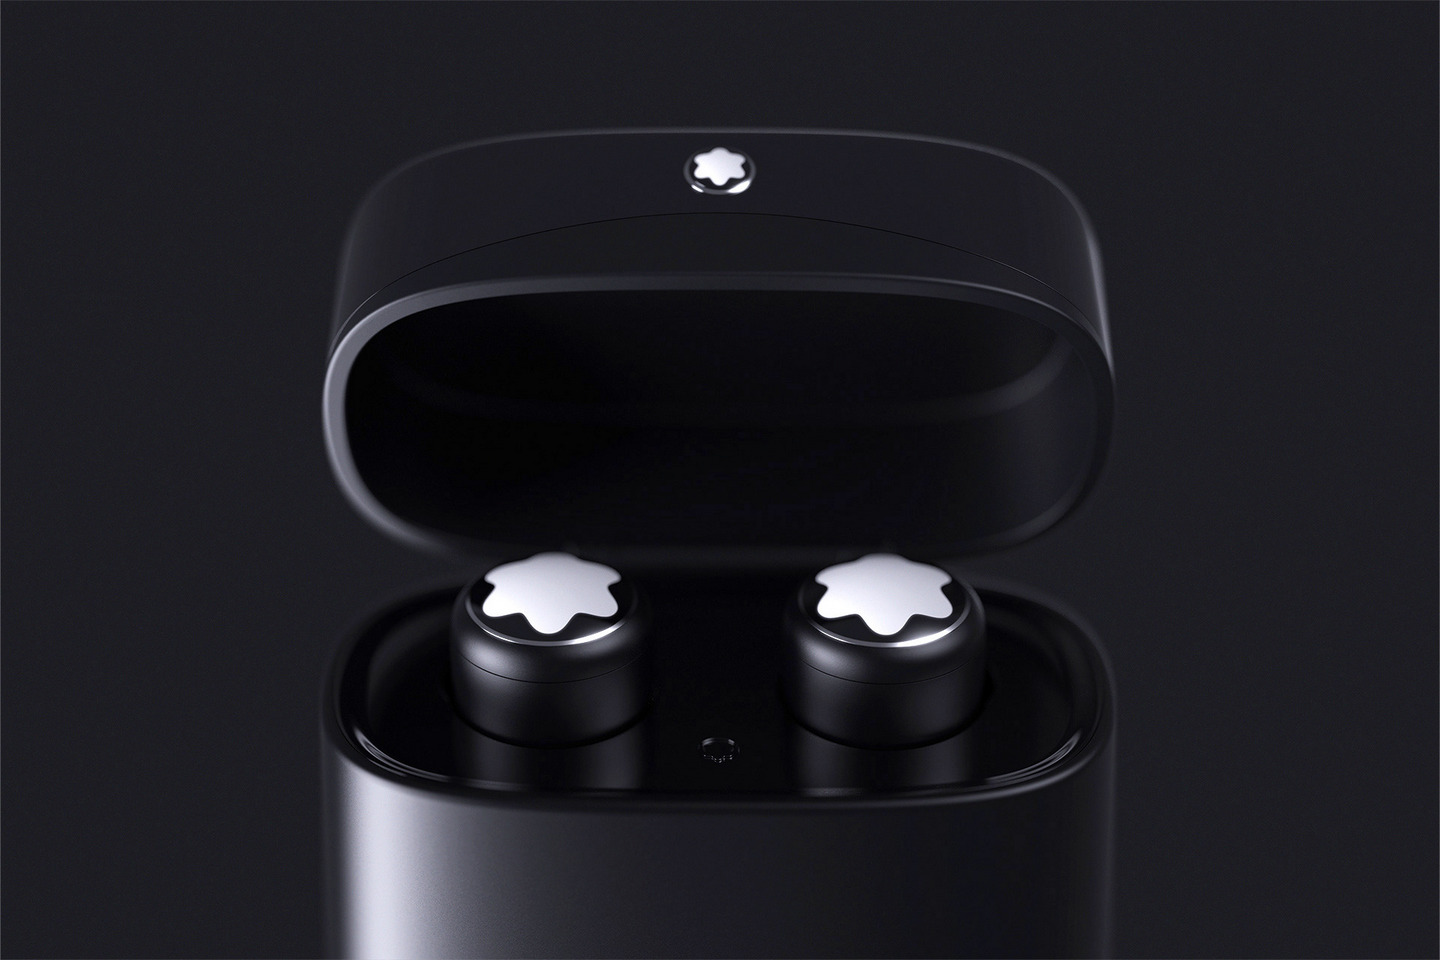 #Conceptual Montblanc TWS earbuds bring luxurious gentleman’s style to tech